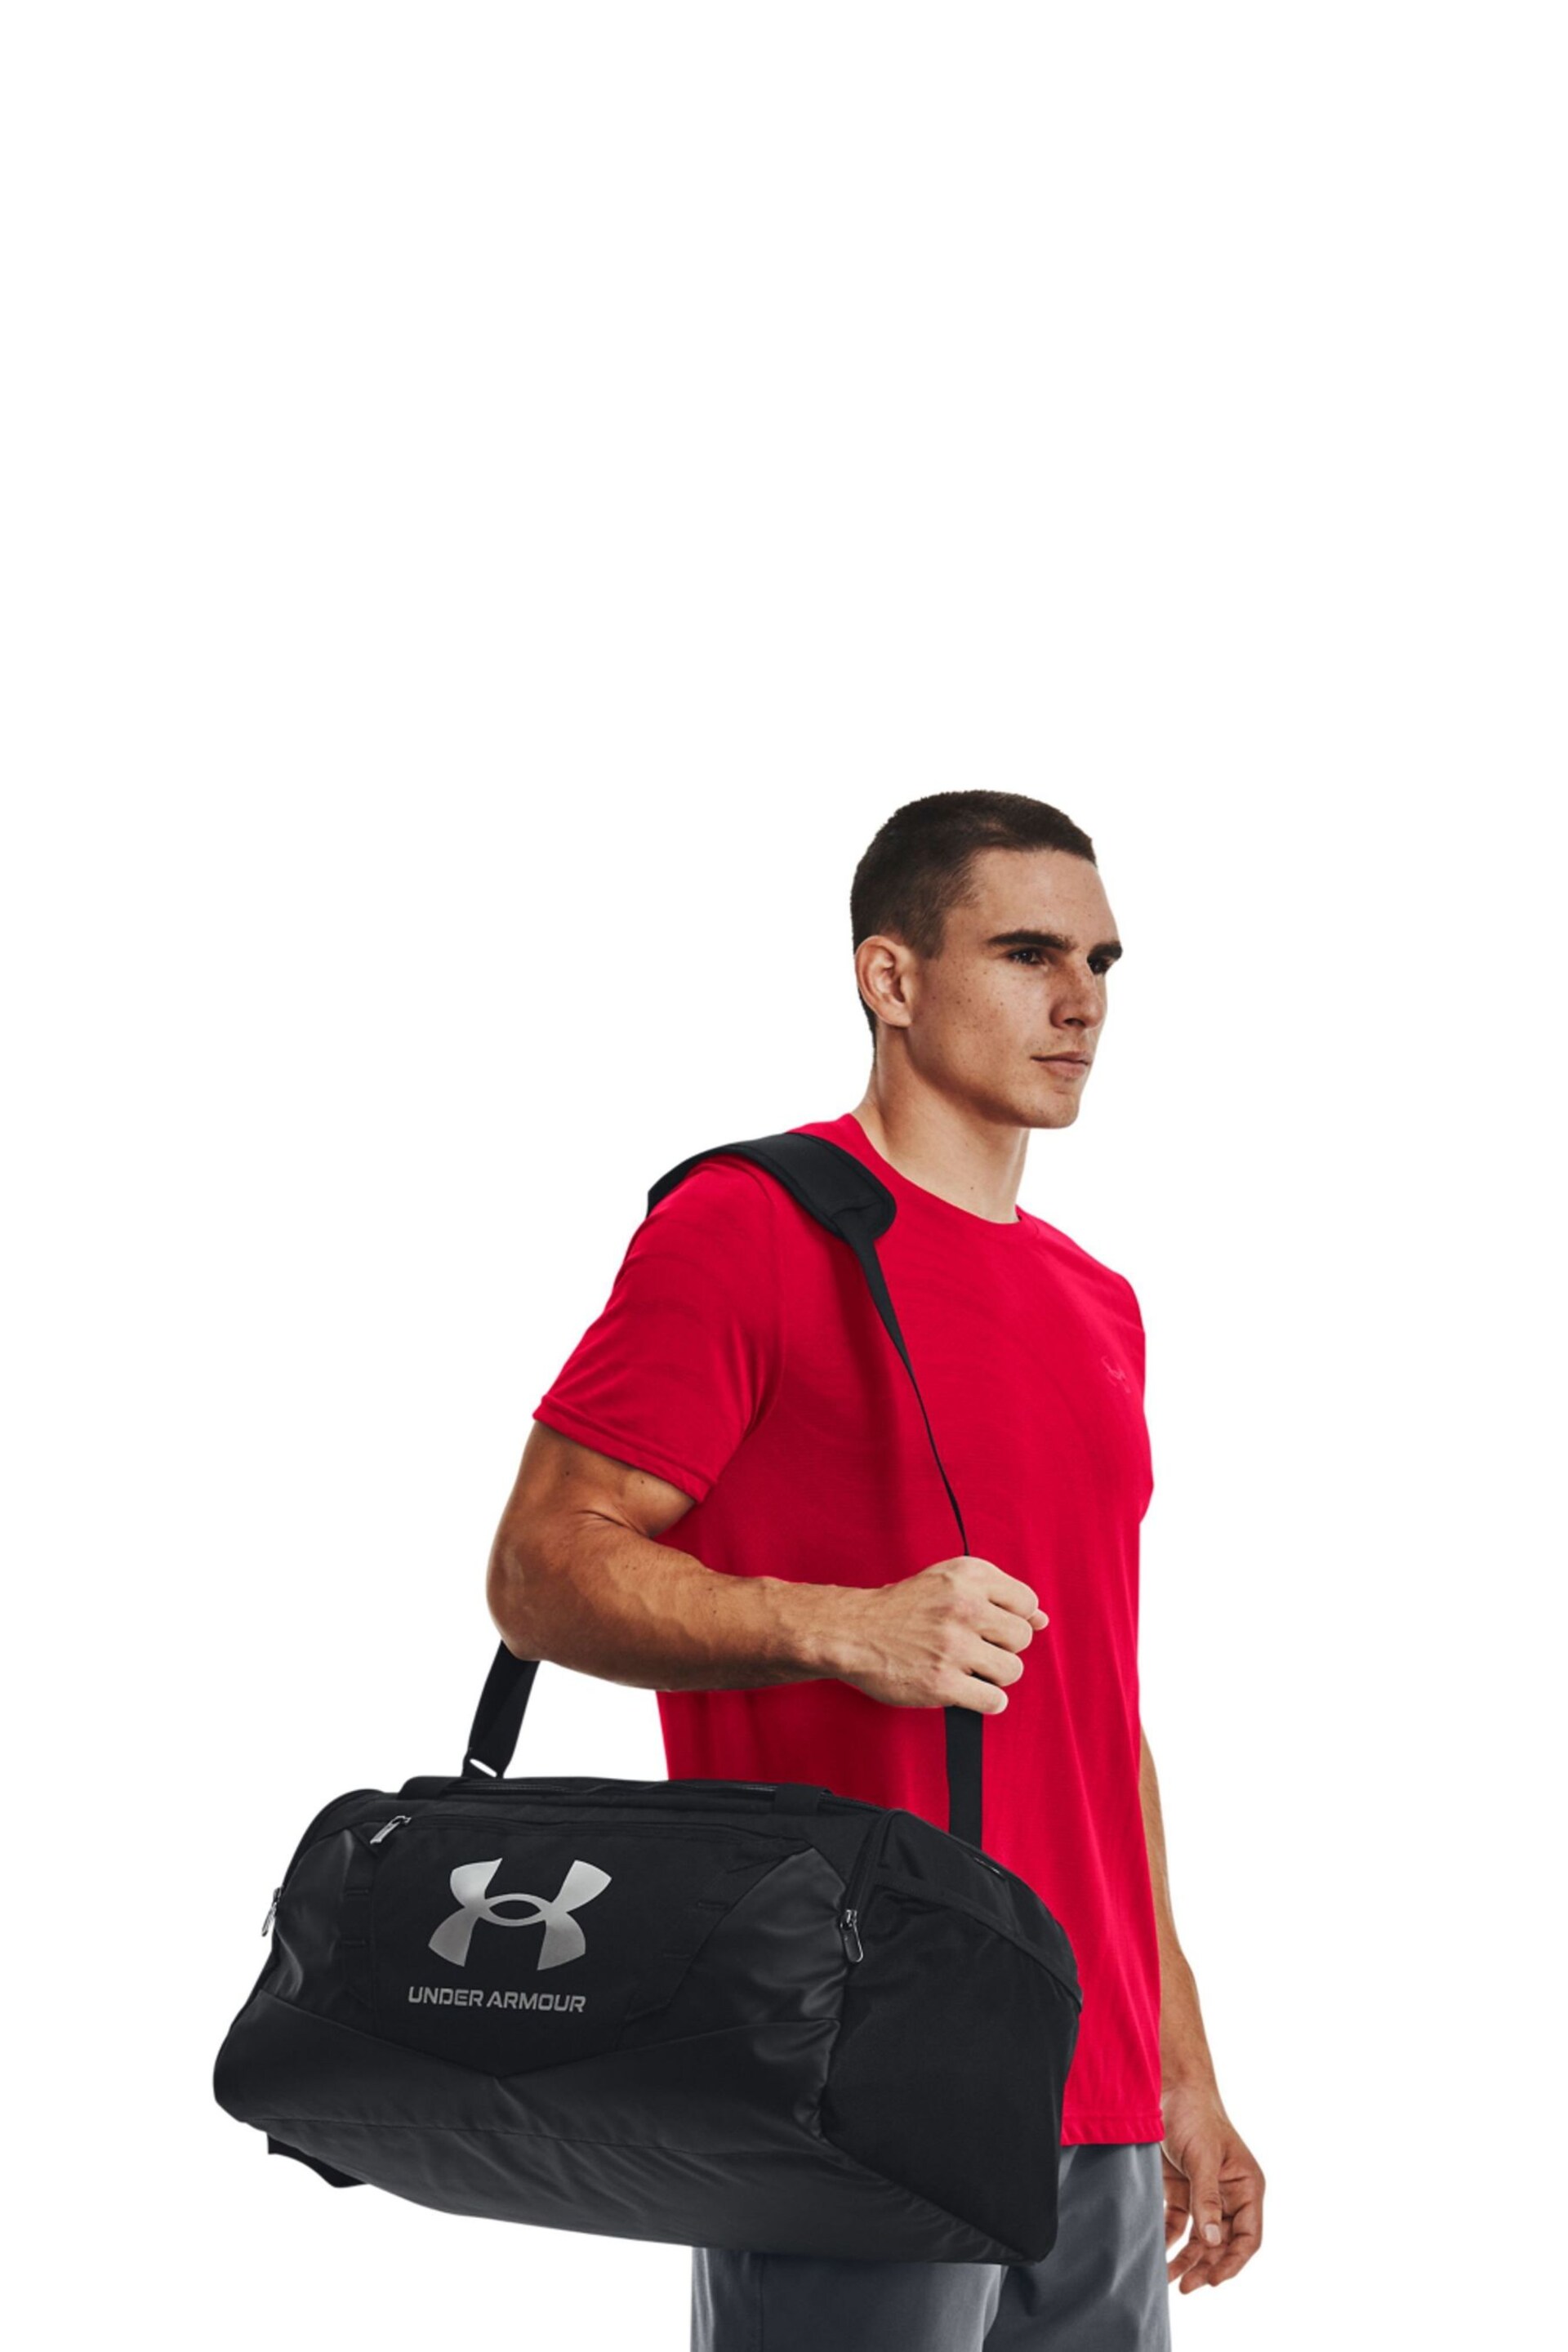 Under Armour Black Undeniable 5.0 Small Duffle Bag - Image 1 of 8